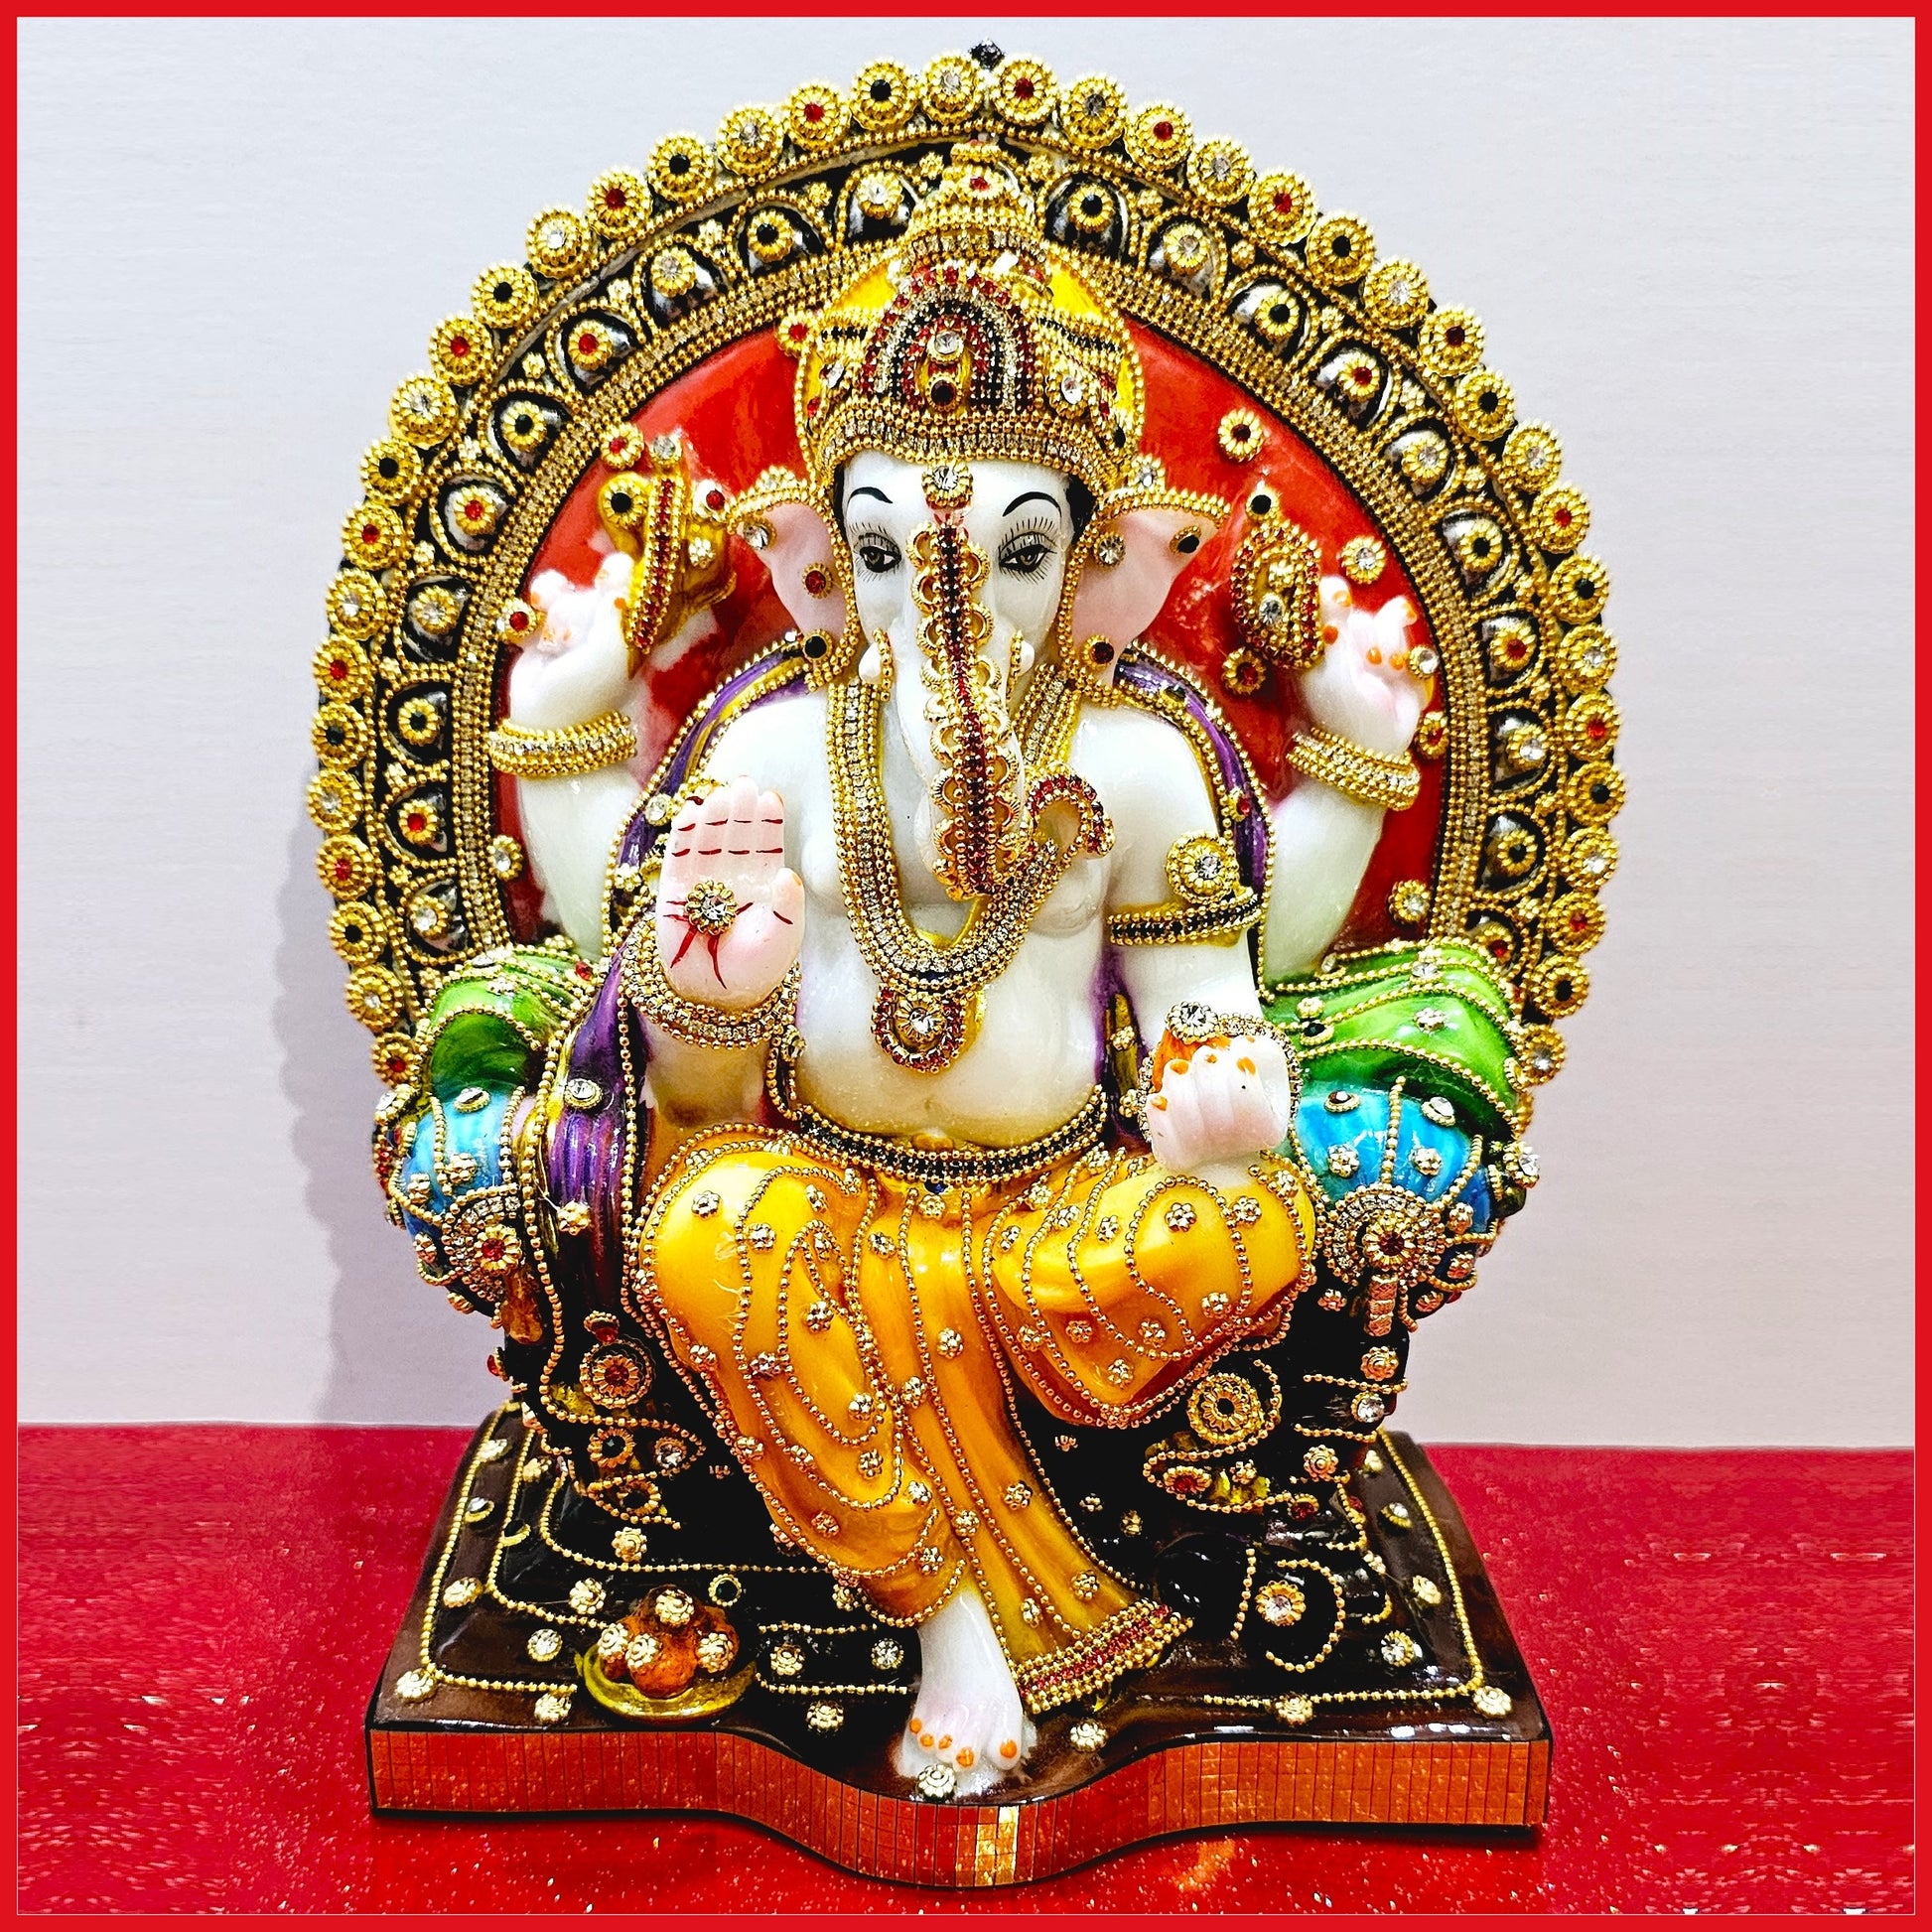 Large Lord Ganesh statue